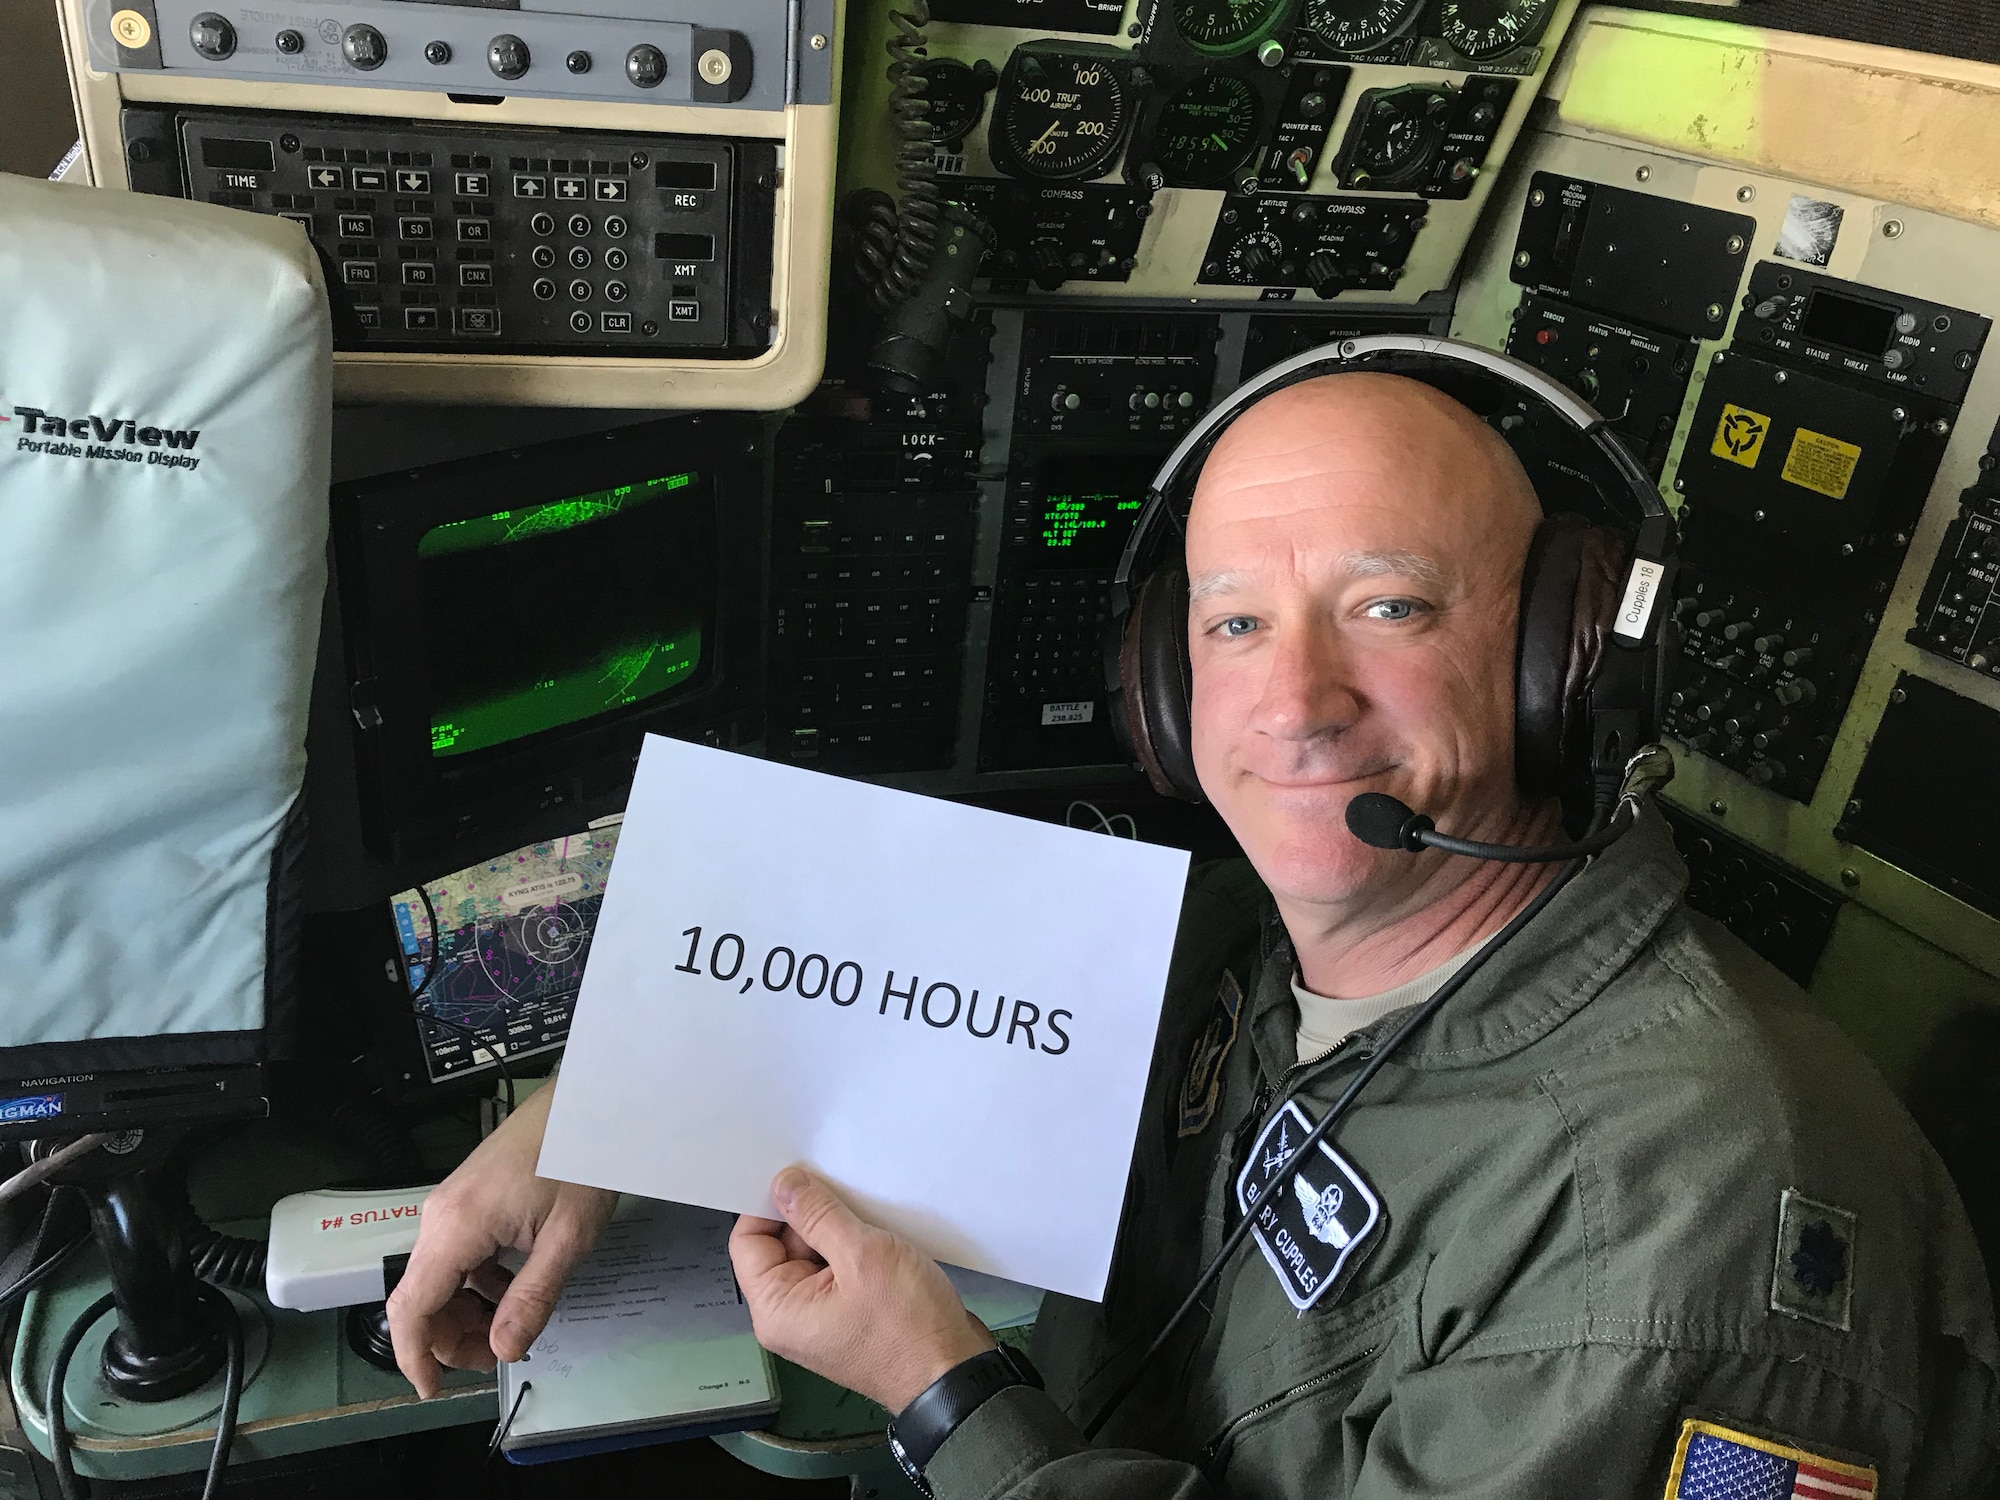 Lt. Col. Barry “JR” Cupples, a navigator with the 757th Airlift Squadron, holds a 10,000 hours sign in the flight deck of a C-130H Hercules aircraft for a photo at the exact moment he completed his ten thousandth C-130 flight hour.